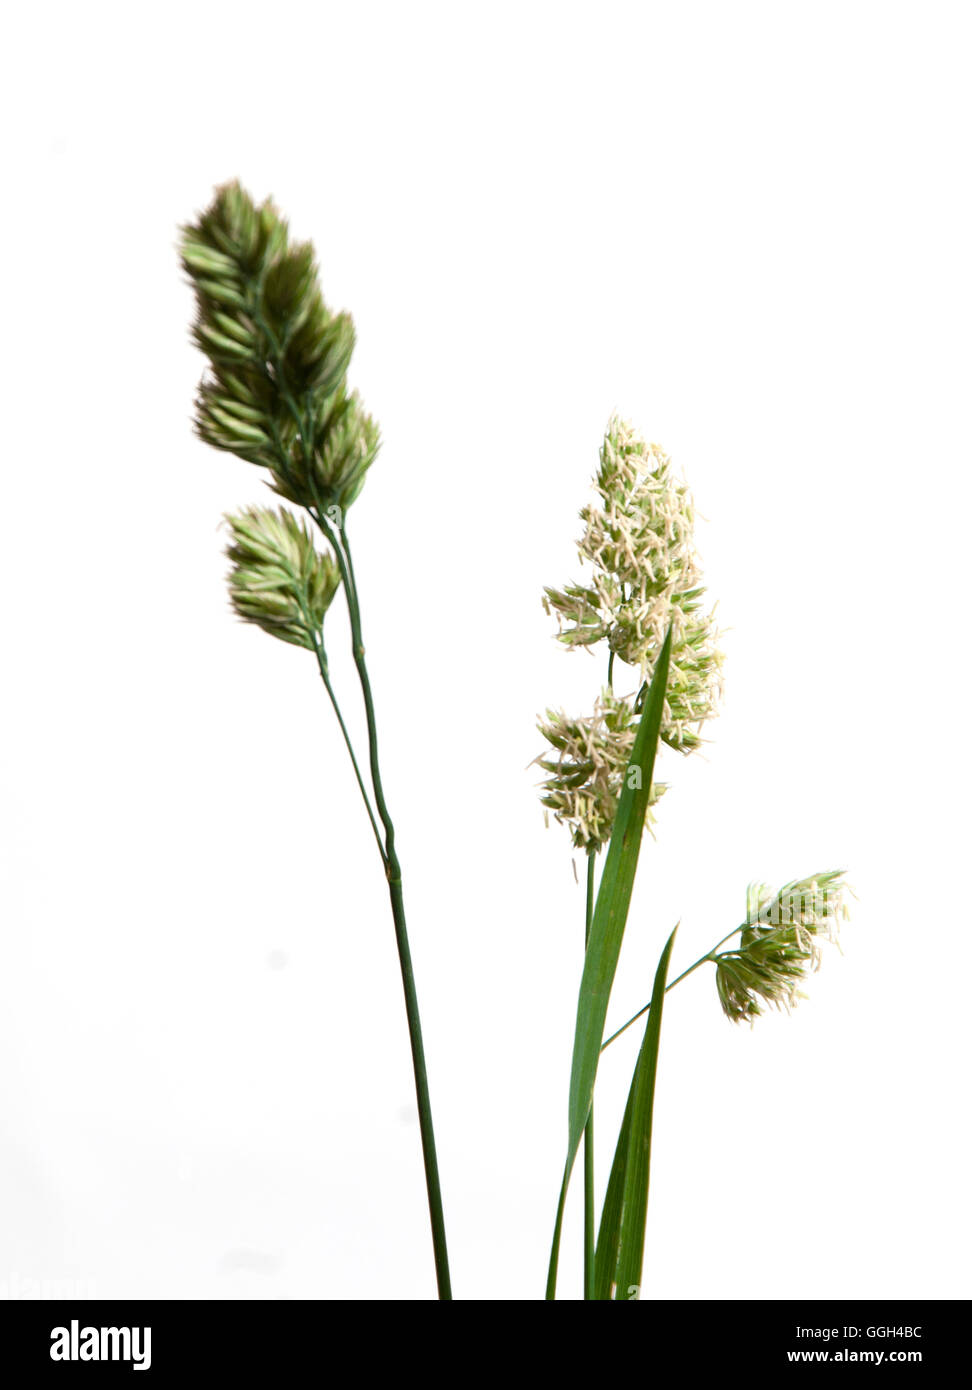 Cockfoot grass over white background, close up Stock Photo